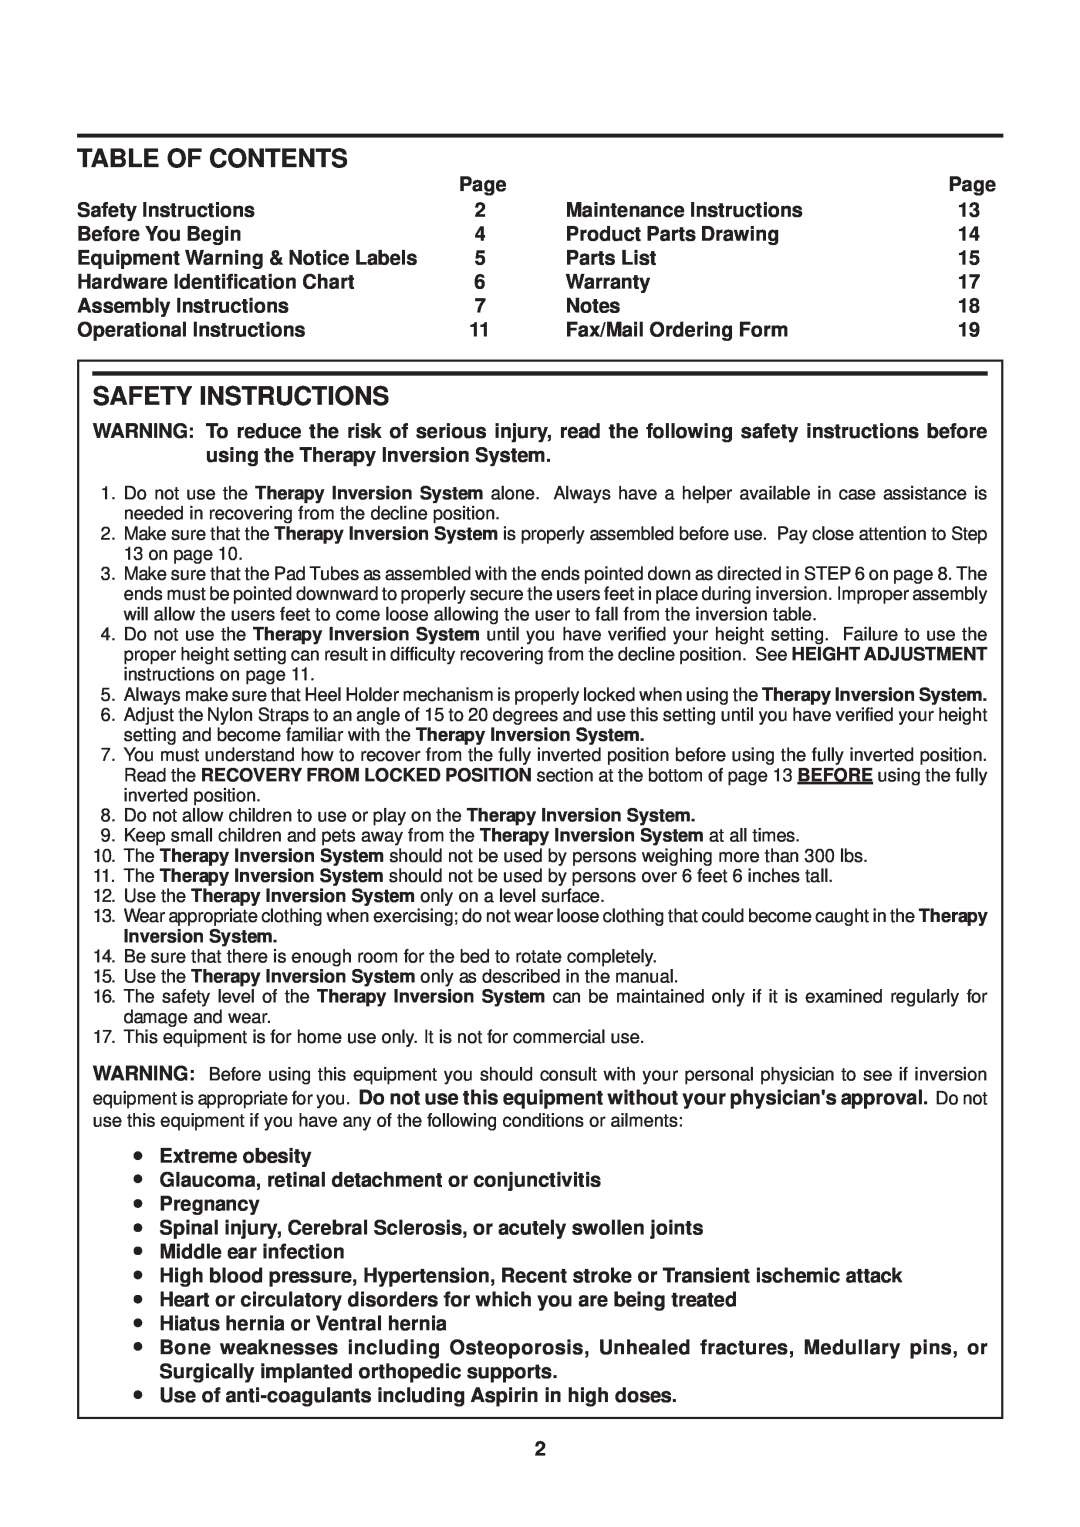 Stamina Products 55-1539A owner manual Table Of Contents, Safety Instructions, Inversion System 